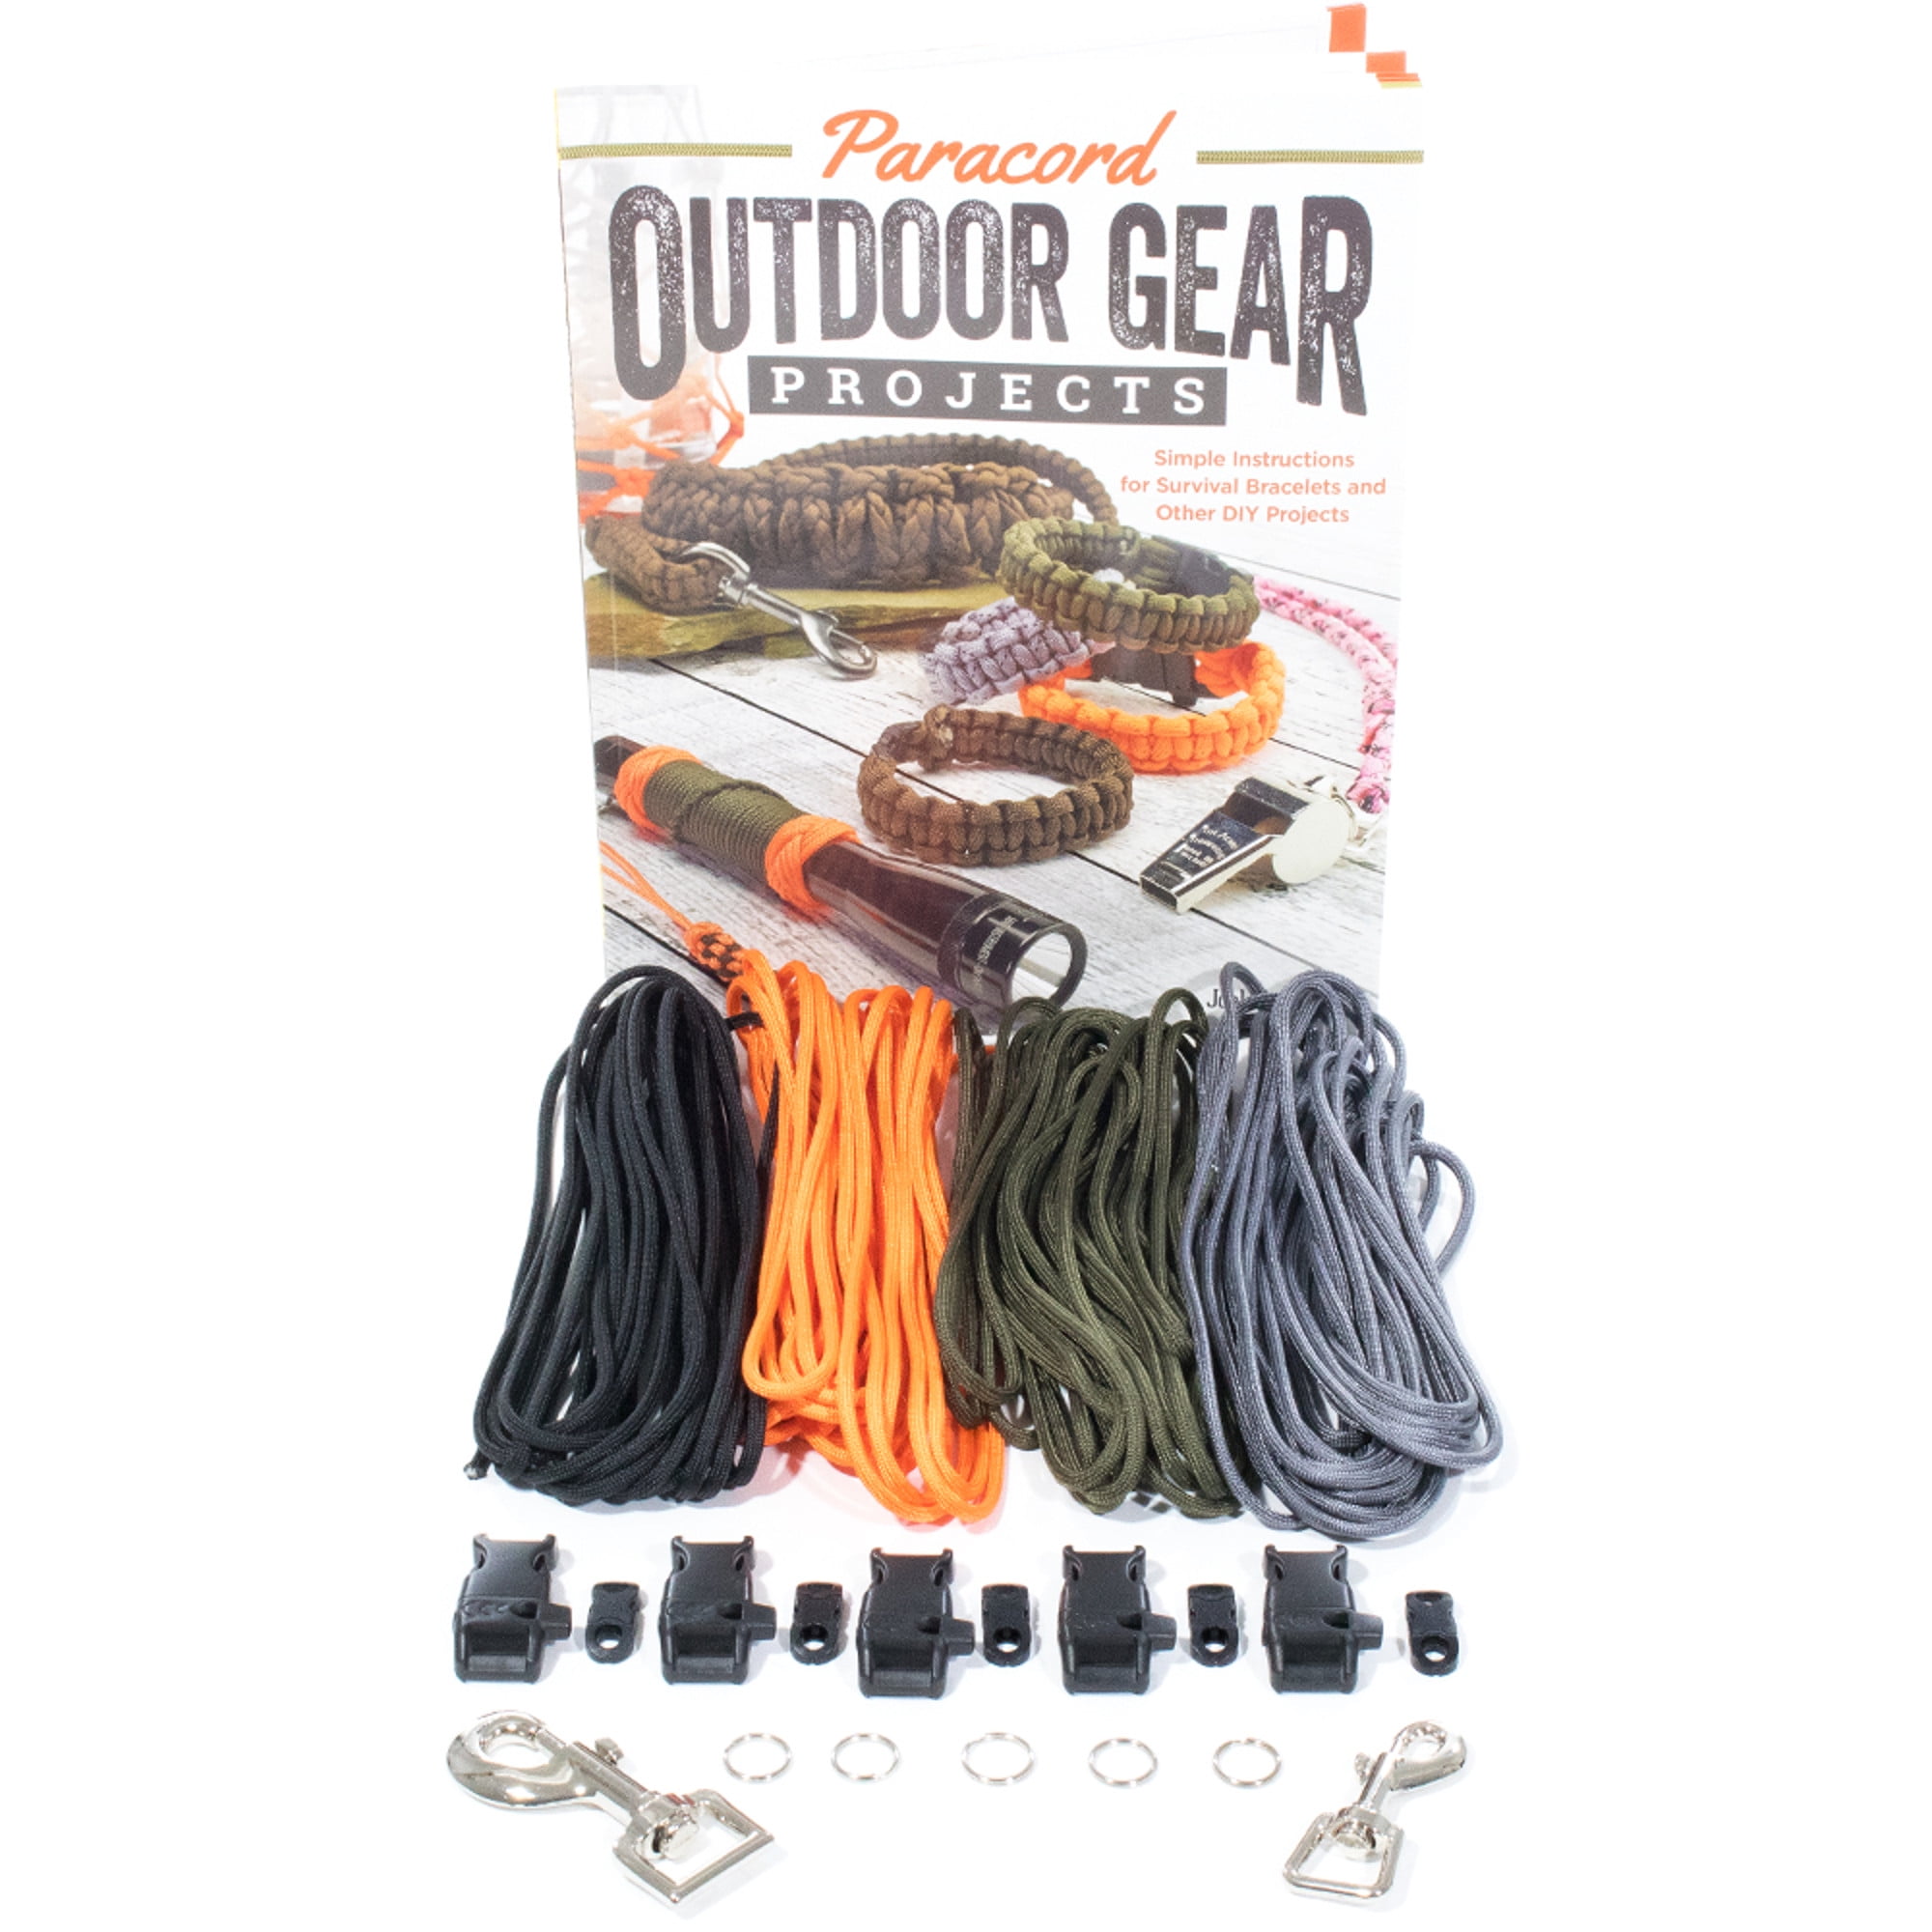 Paracord Outdoor Gear DIY Craft Book and Crafting Kit - Create Simple  Projects for the Outdoors - Survival Bracelet, Knots, Handle Wraps, and More